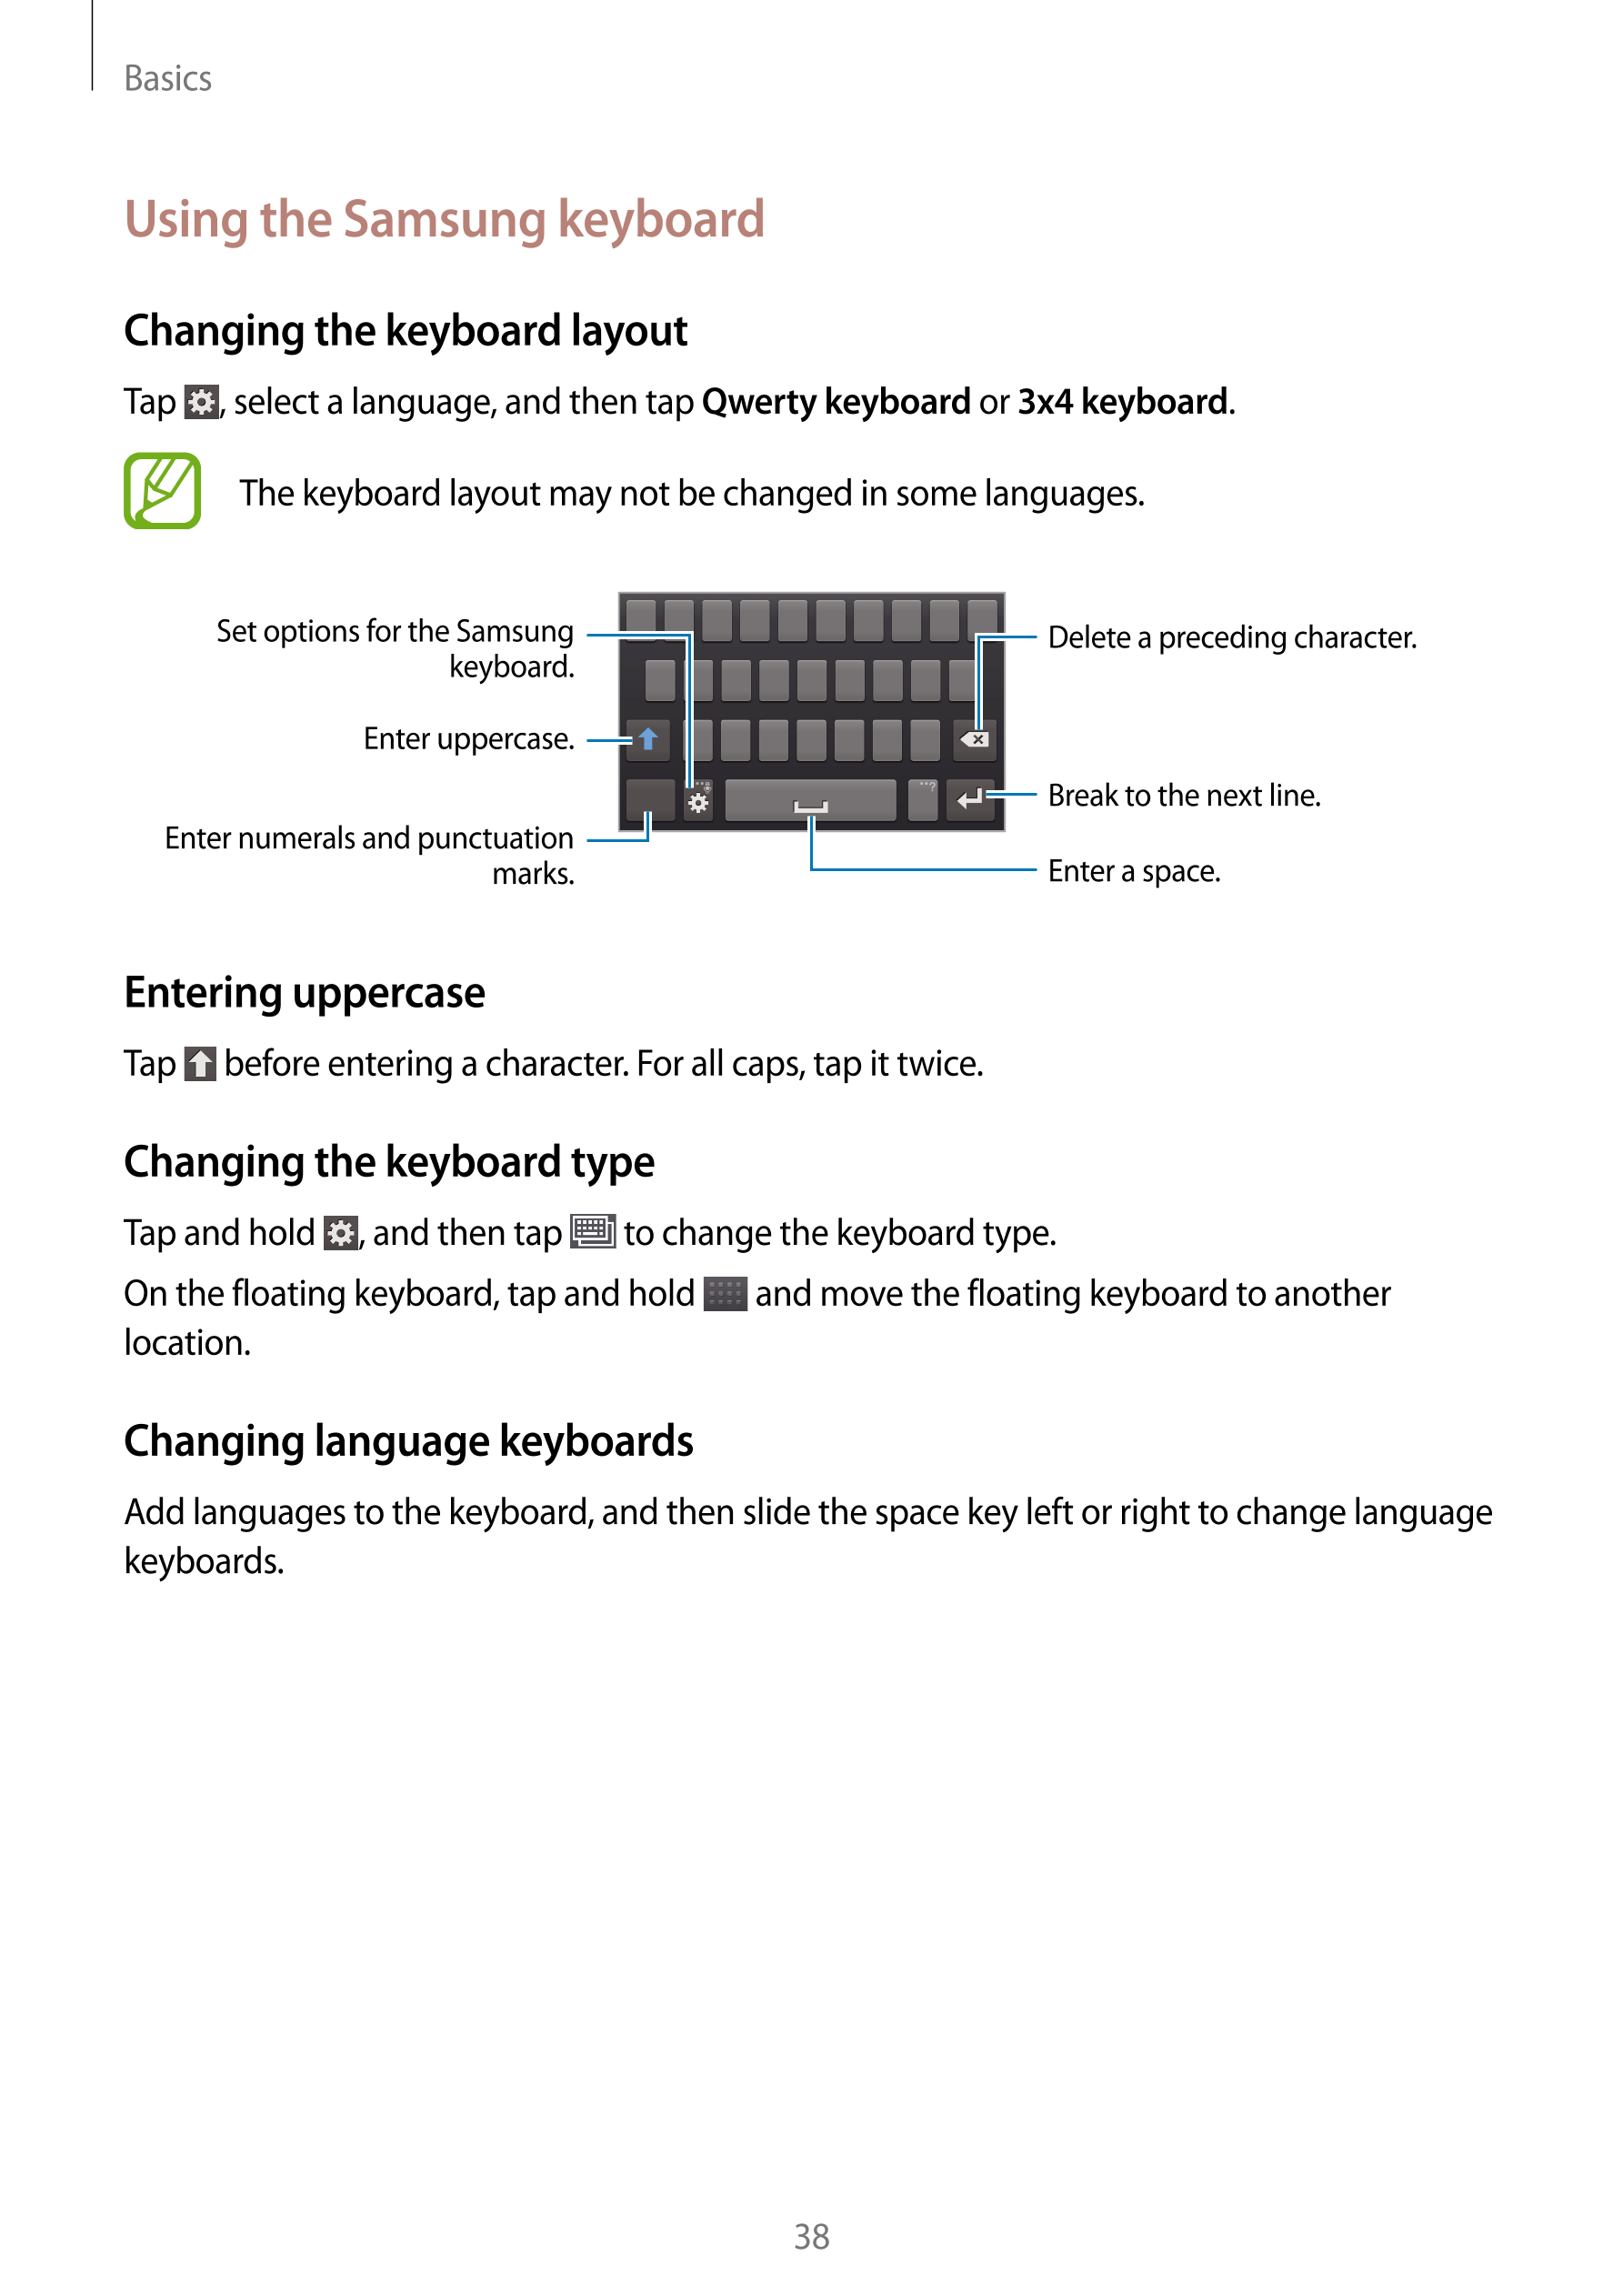 Basics
Using the Samsung keyboard
Changing the keyboard layout
Tap  , select a language, and then tap  Qwerty keyboard or  3x4 k